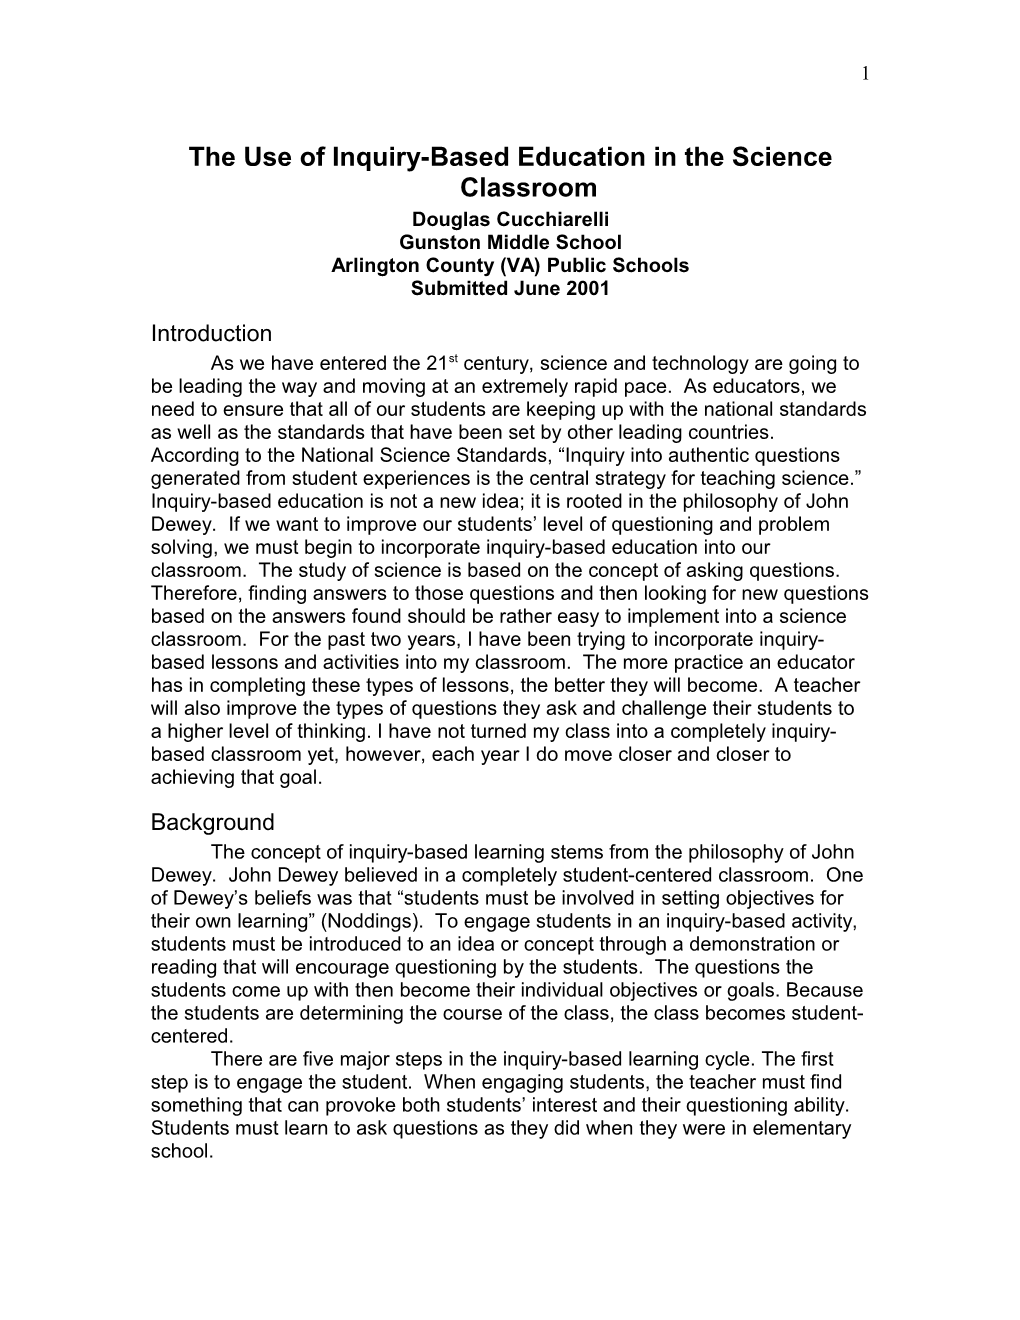 The Use of Inquiry-Based Education in the Science Classroom